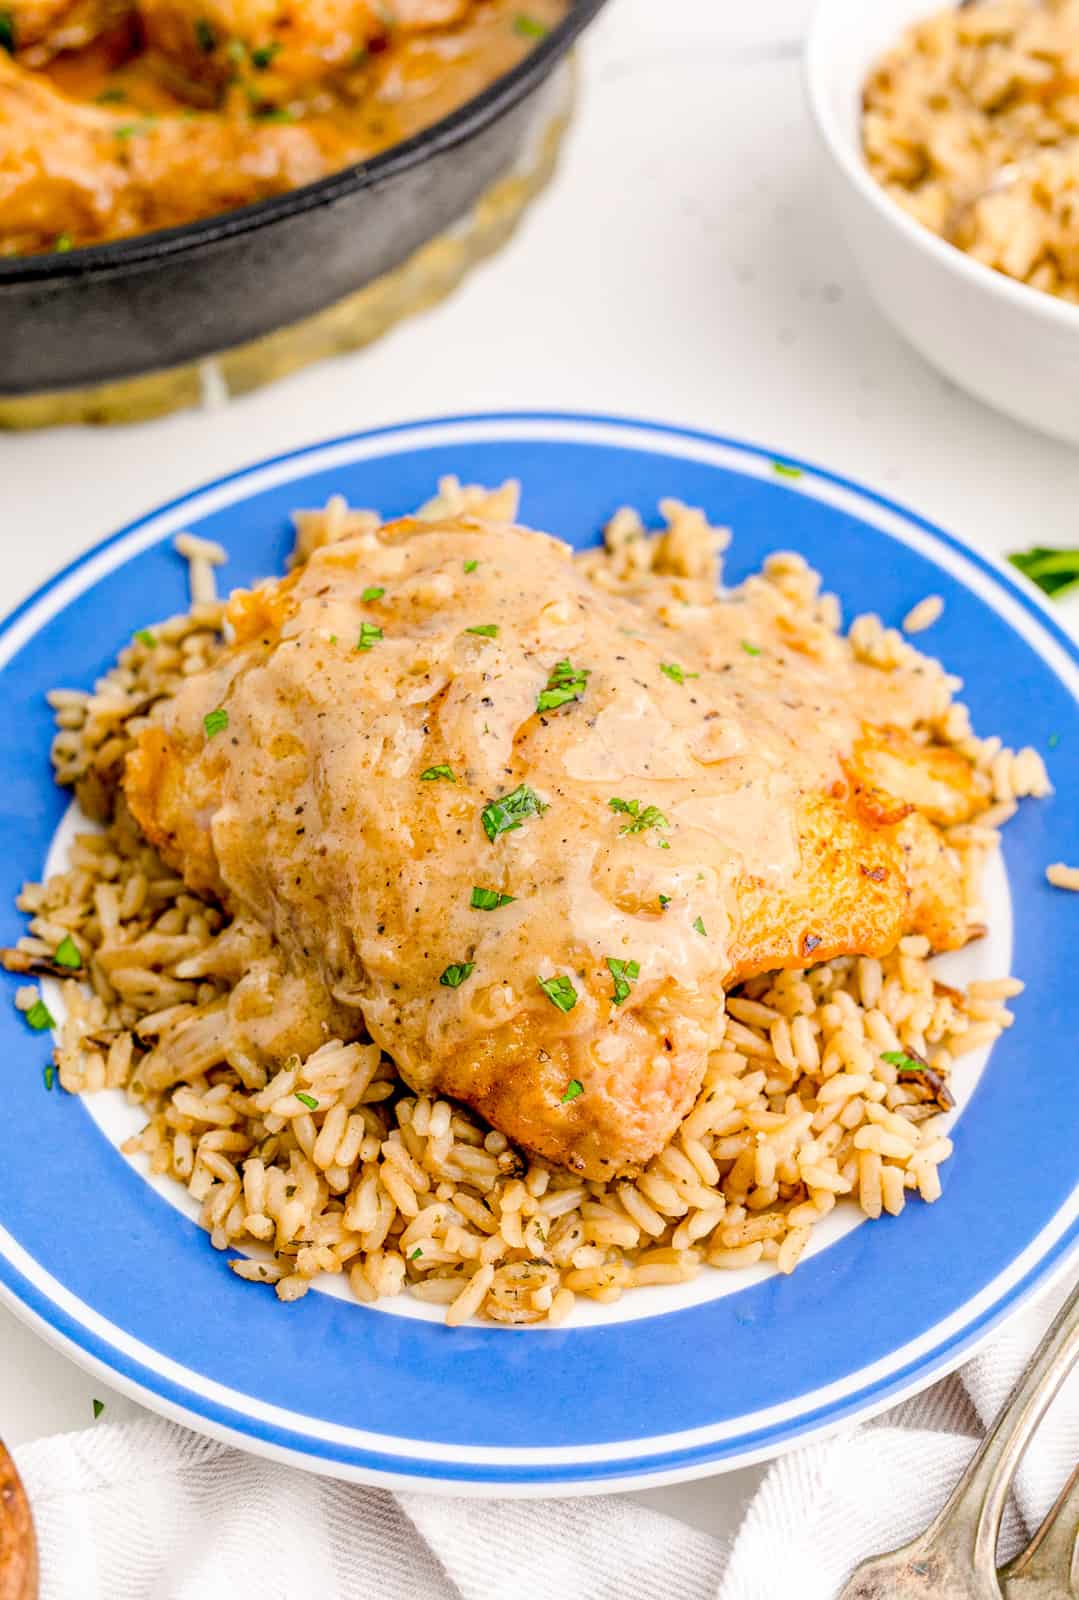 Smothered Chicken served over rice on plate.